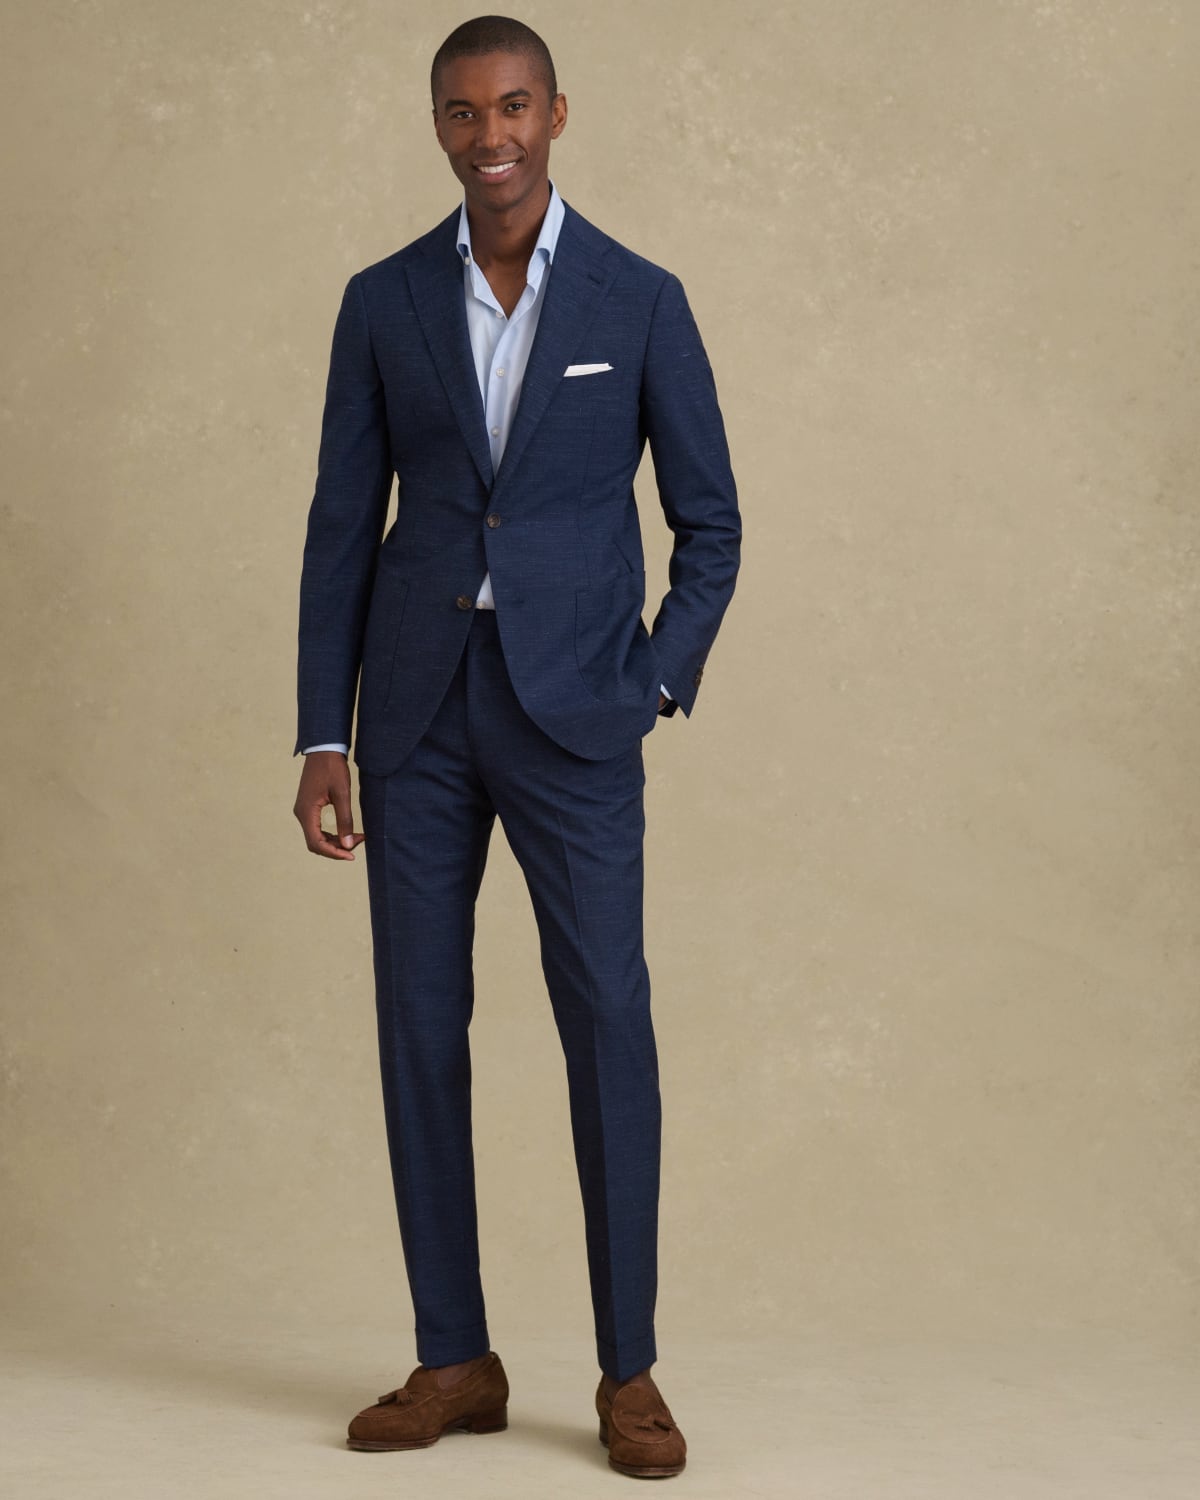 Cocktail Attire for Men in 2023: Everything You Need to Know